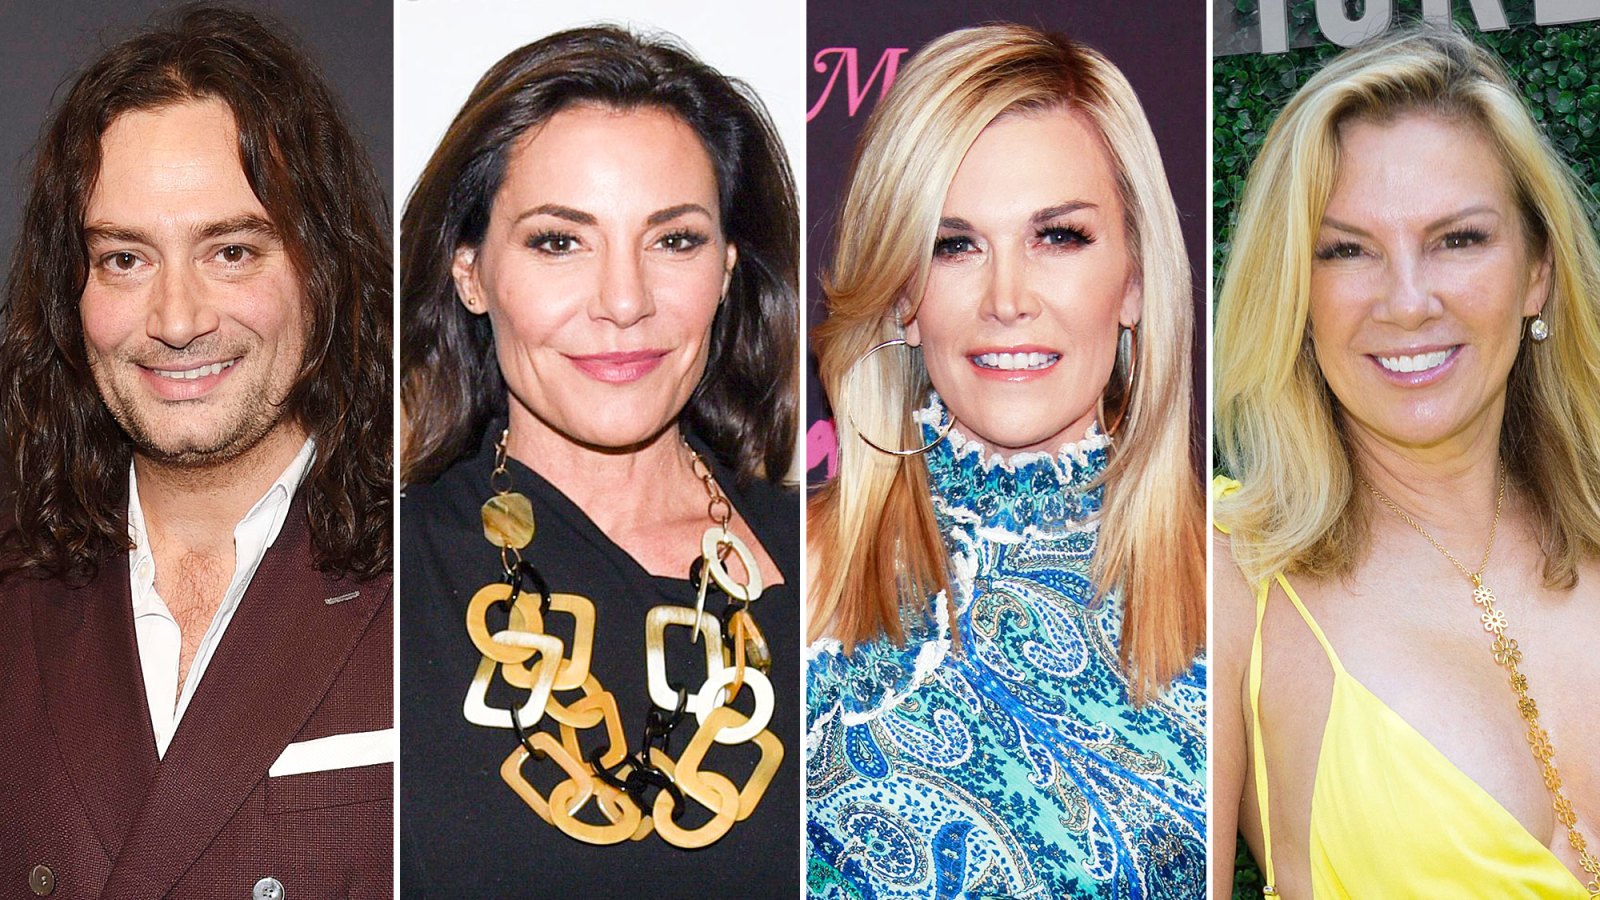 Real Housewives Of New York Fans Speculate Constantine Maroulis Is the ‘American Idol Star Luann de Lesseps Tinsley Mortimer and Ramona Singer Dated